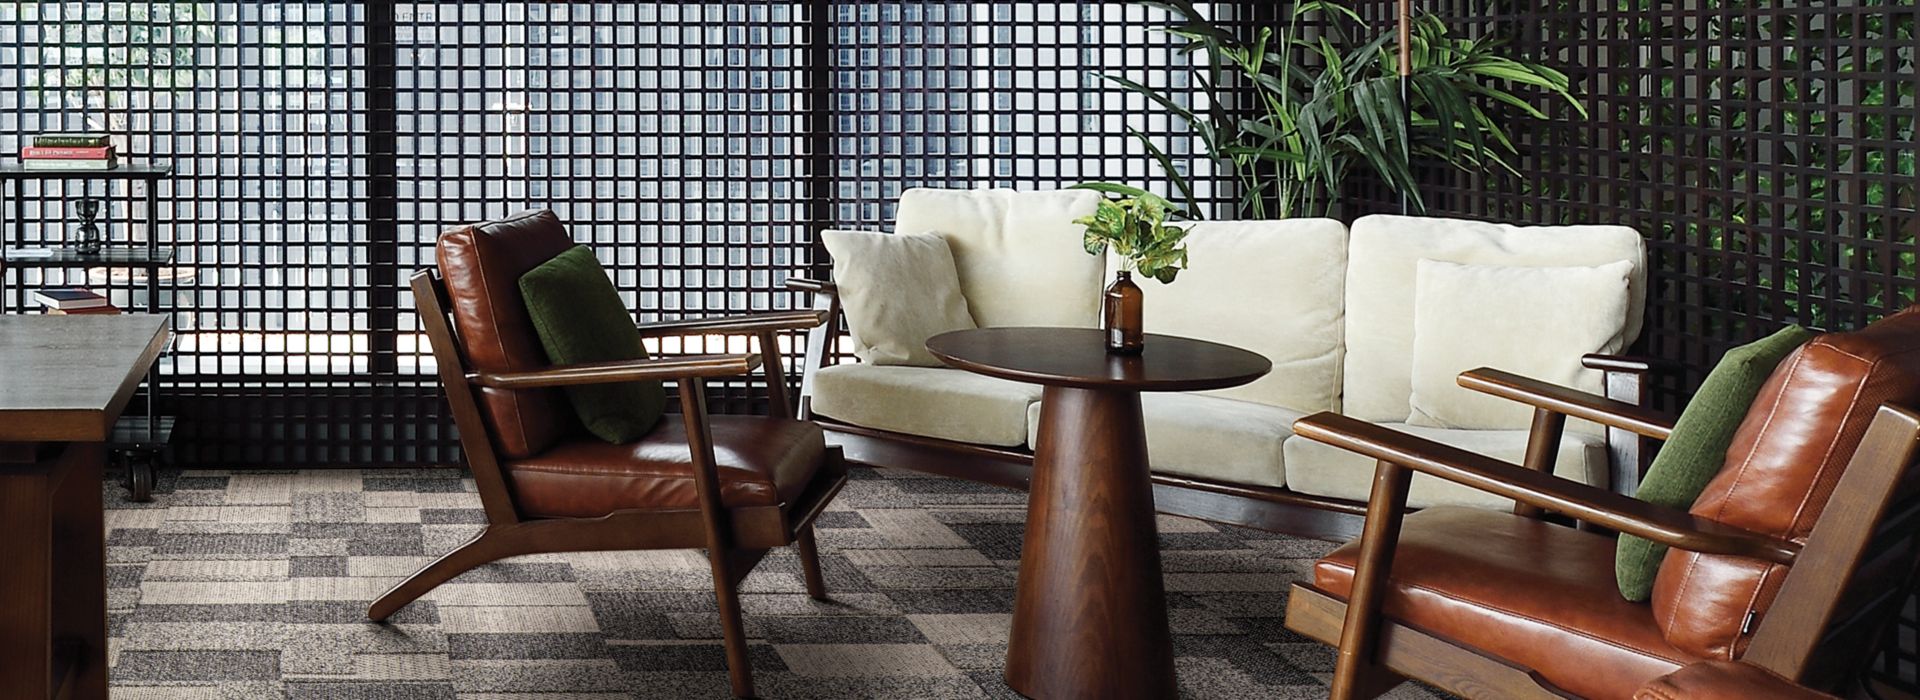 Interface Future Woven plank carpet tile in seating area image number 1